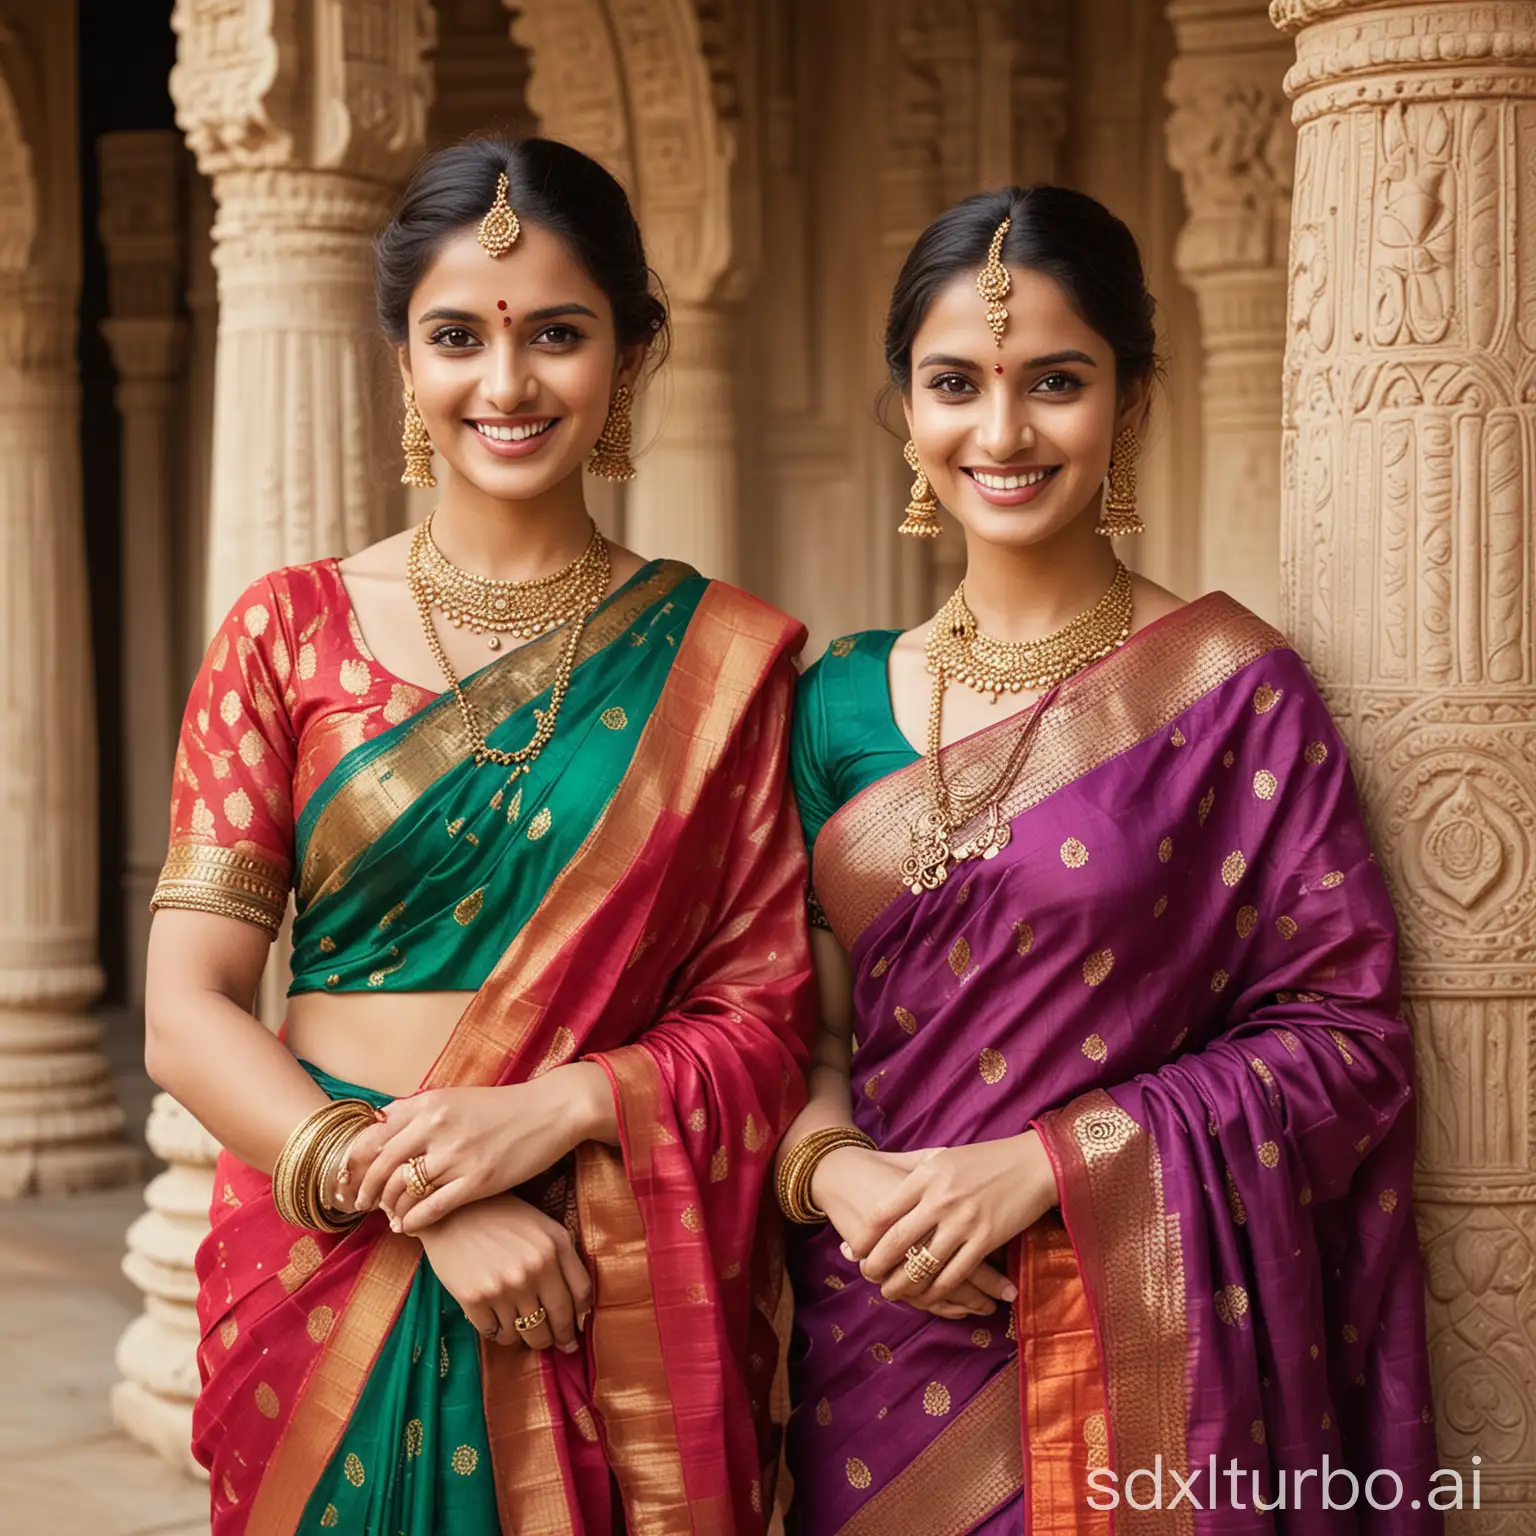 Two elegant women dressed in vibrant traditional Indian sarees stand gracefully side by side, radiating their cultural pride. Their dazzling smiles and exquisite jewelry, including intricate large earrings, add to the charm of the moment as they pose for the camera.